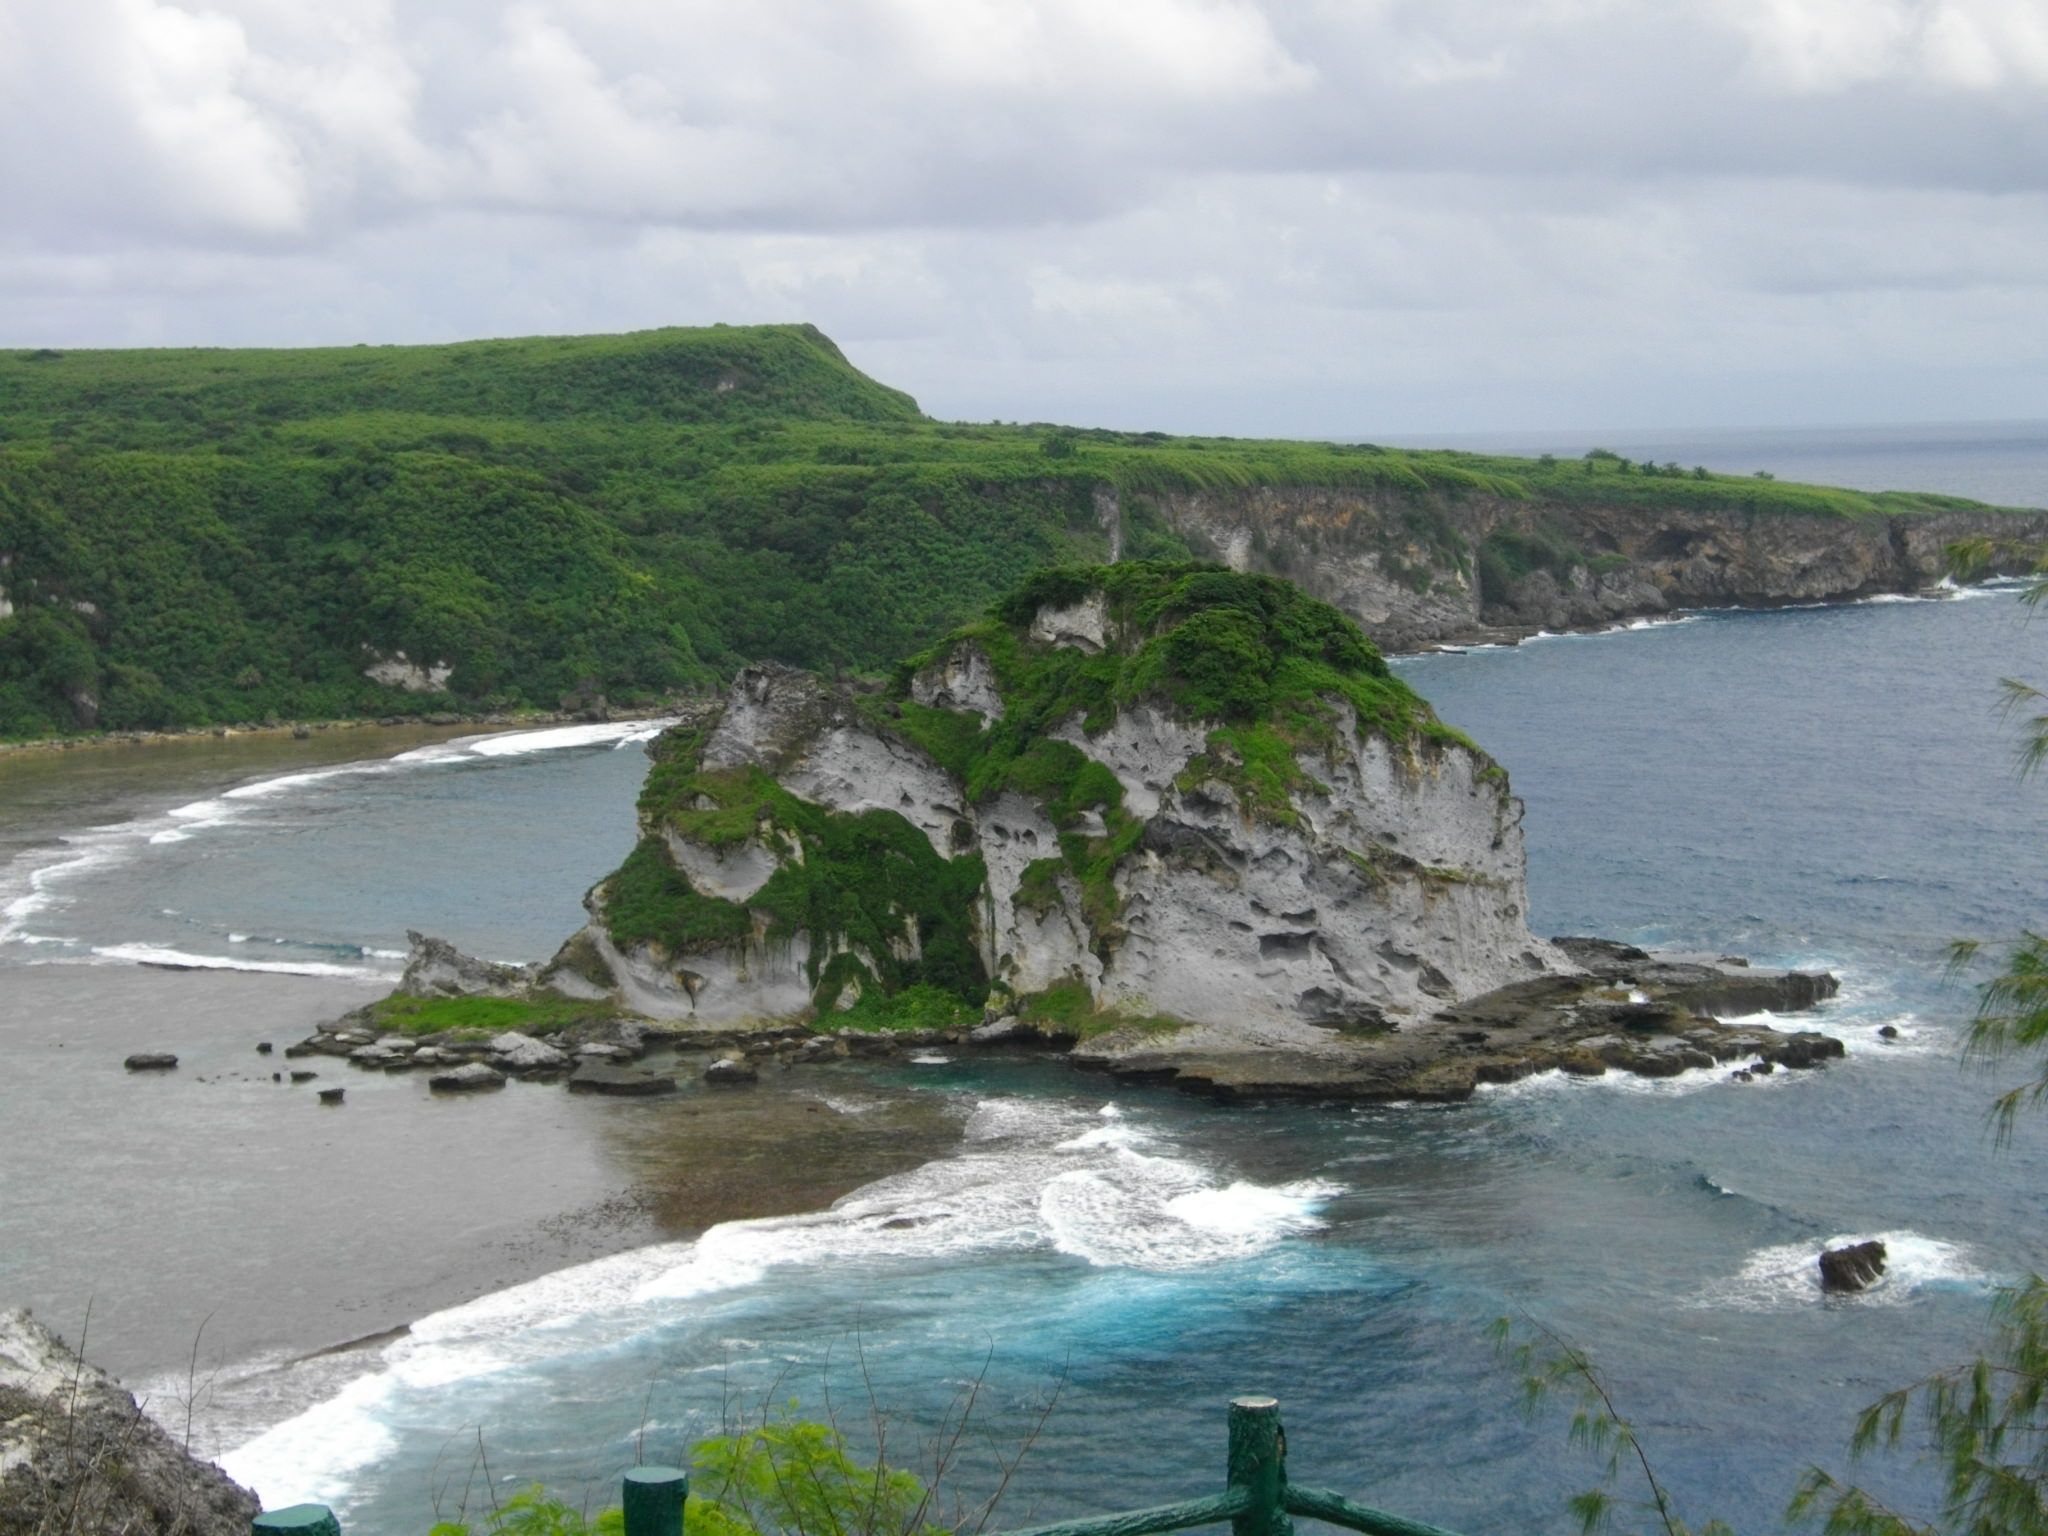 Northern Mariana Islands cannabis, US territory makes adult-use cannabis legalization breakthrough